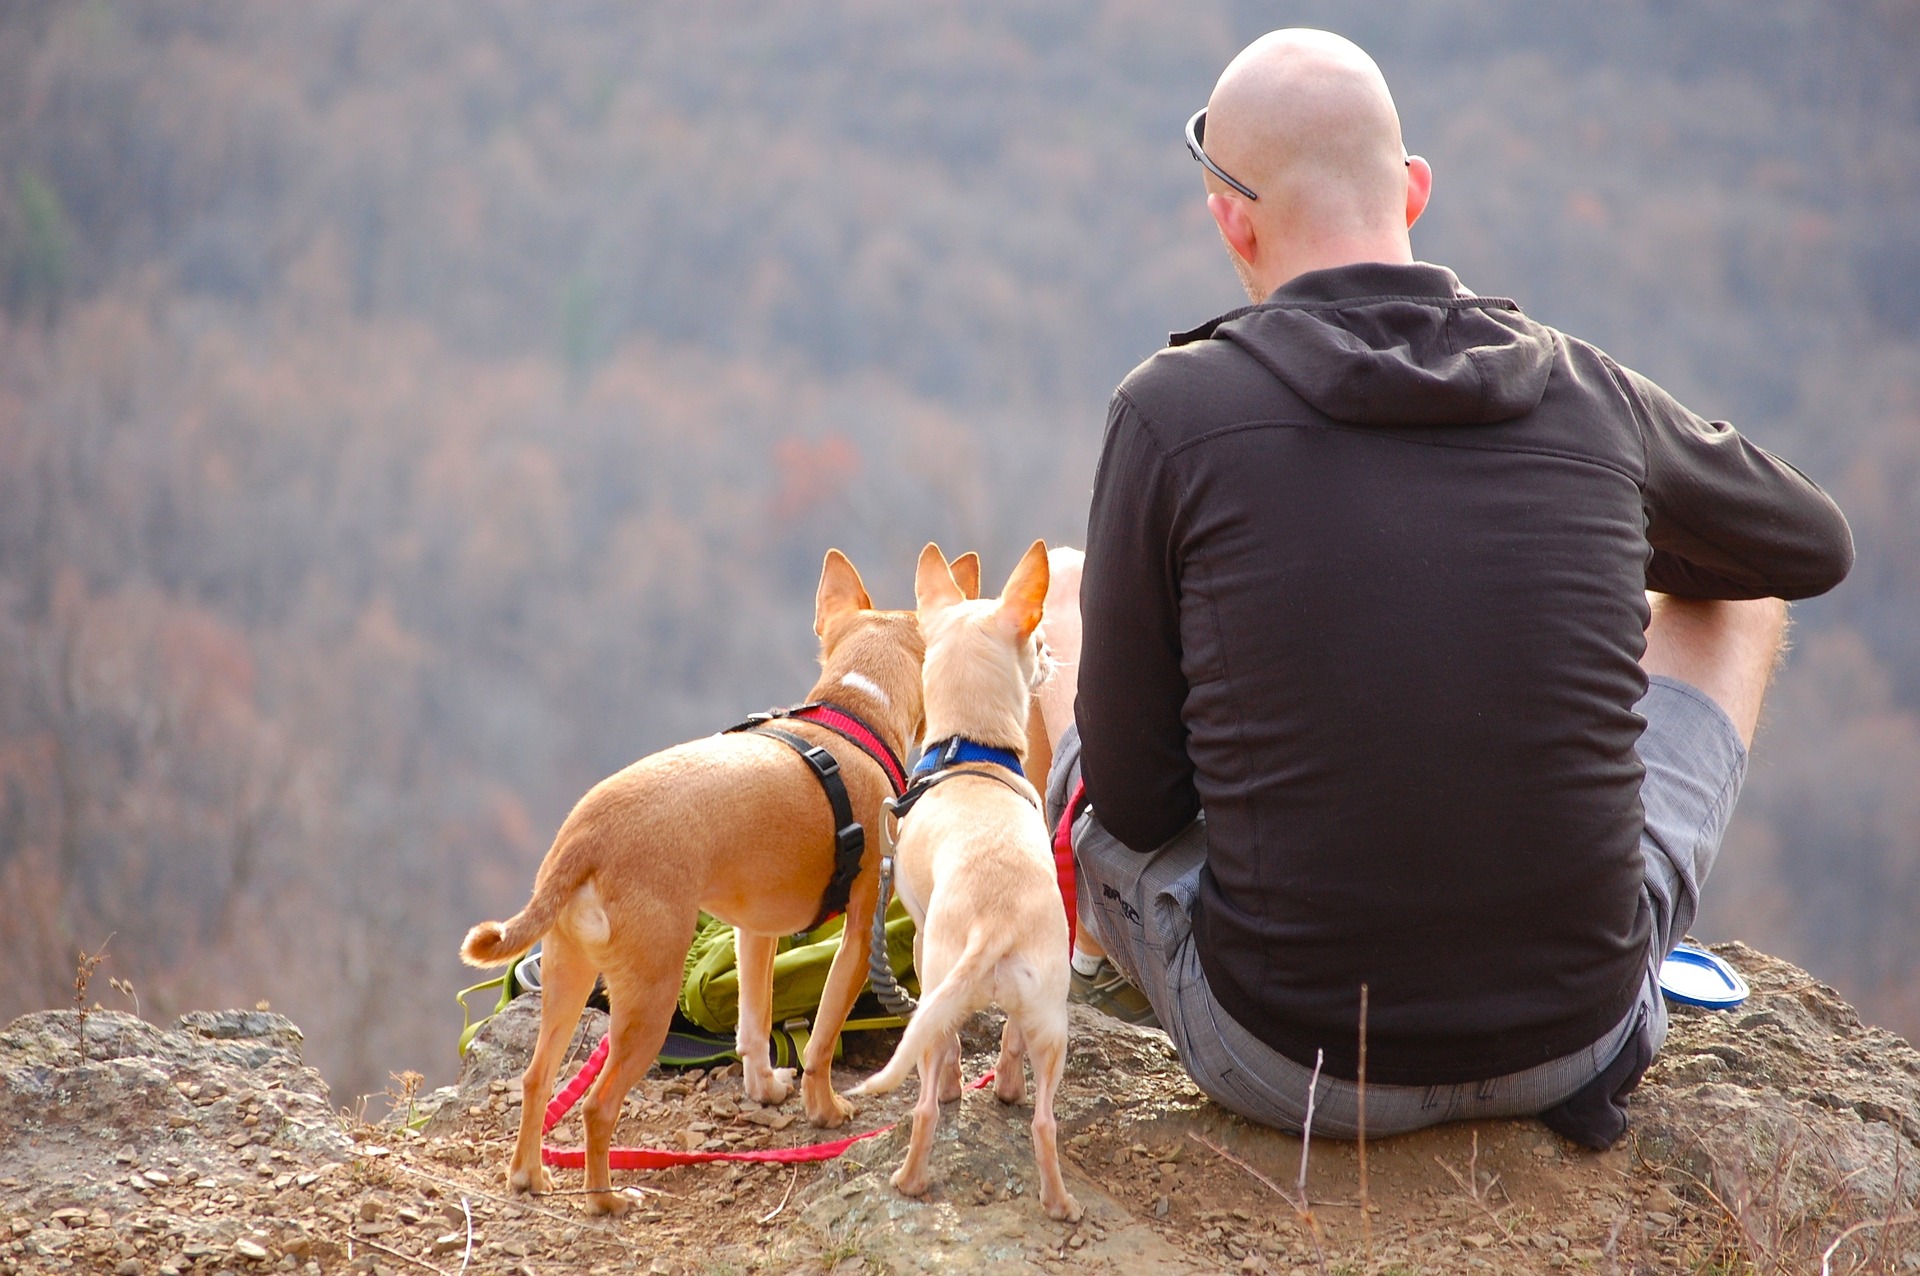 Tips for Traveling with your Dog